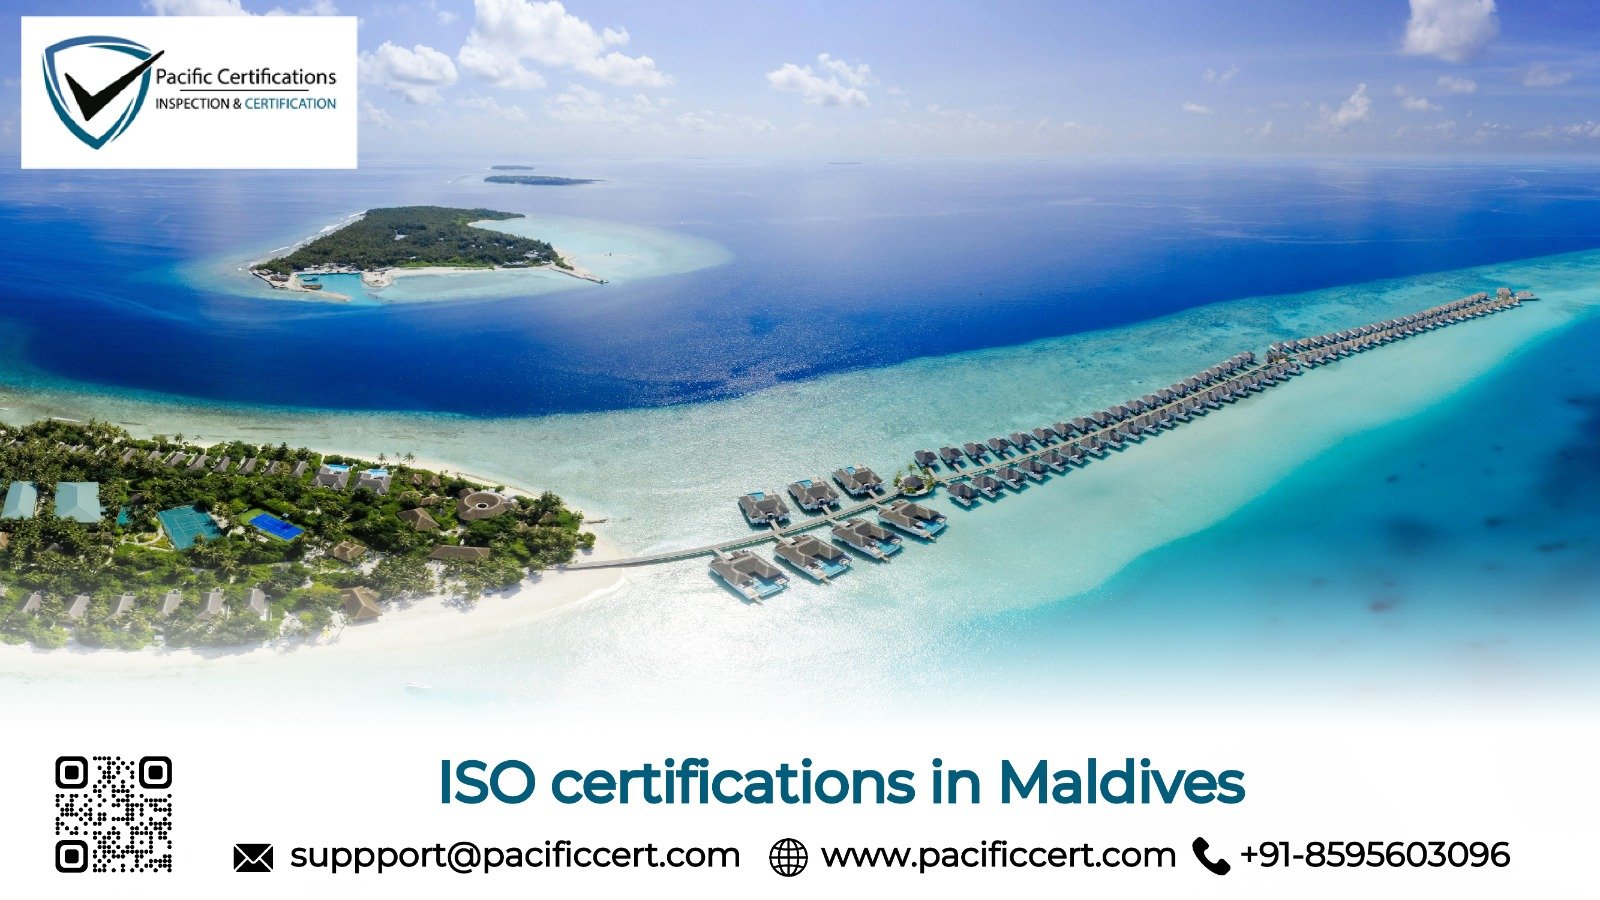 ISO Certifications in Maldives and How Pacific Certifications can help | Pacific Certifications